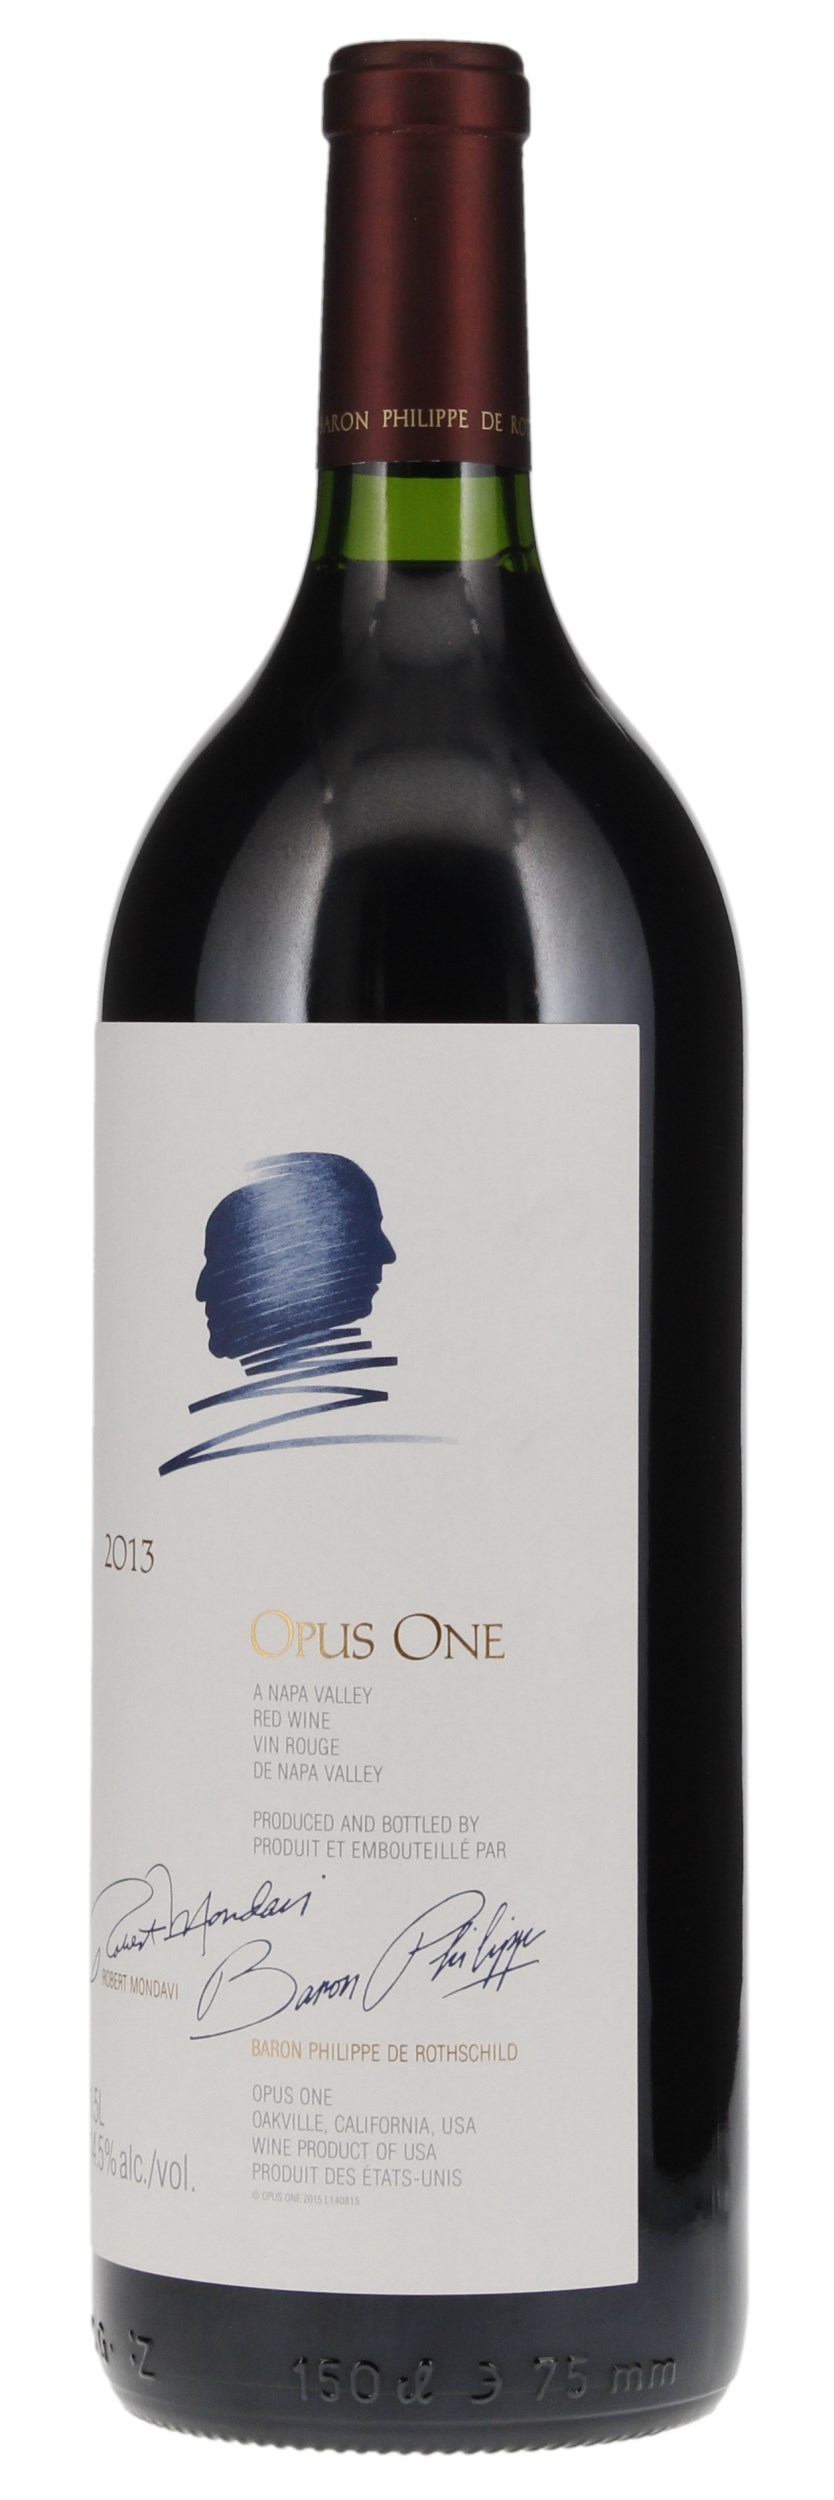 2013 Opus One, 1.5ltr